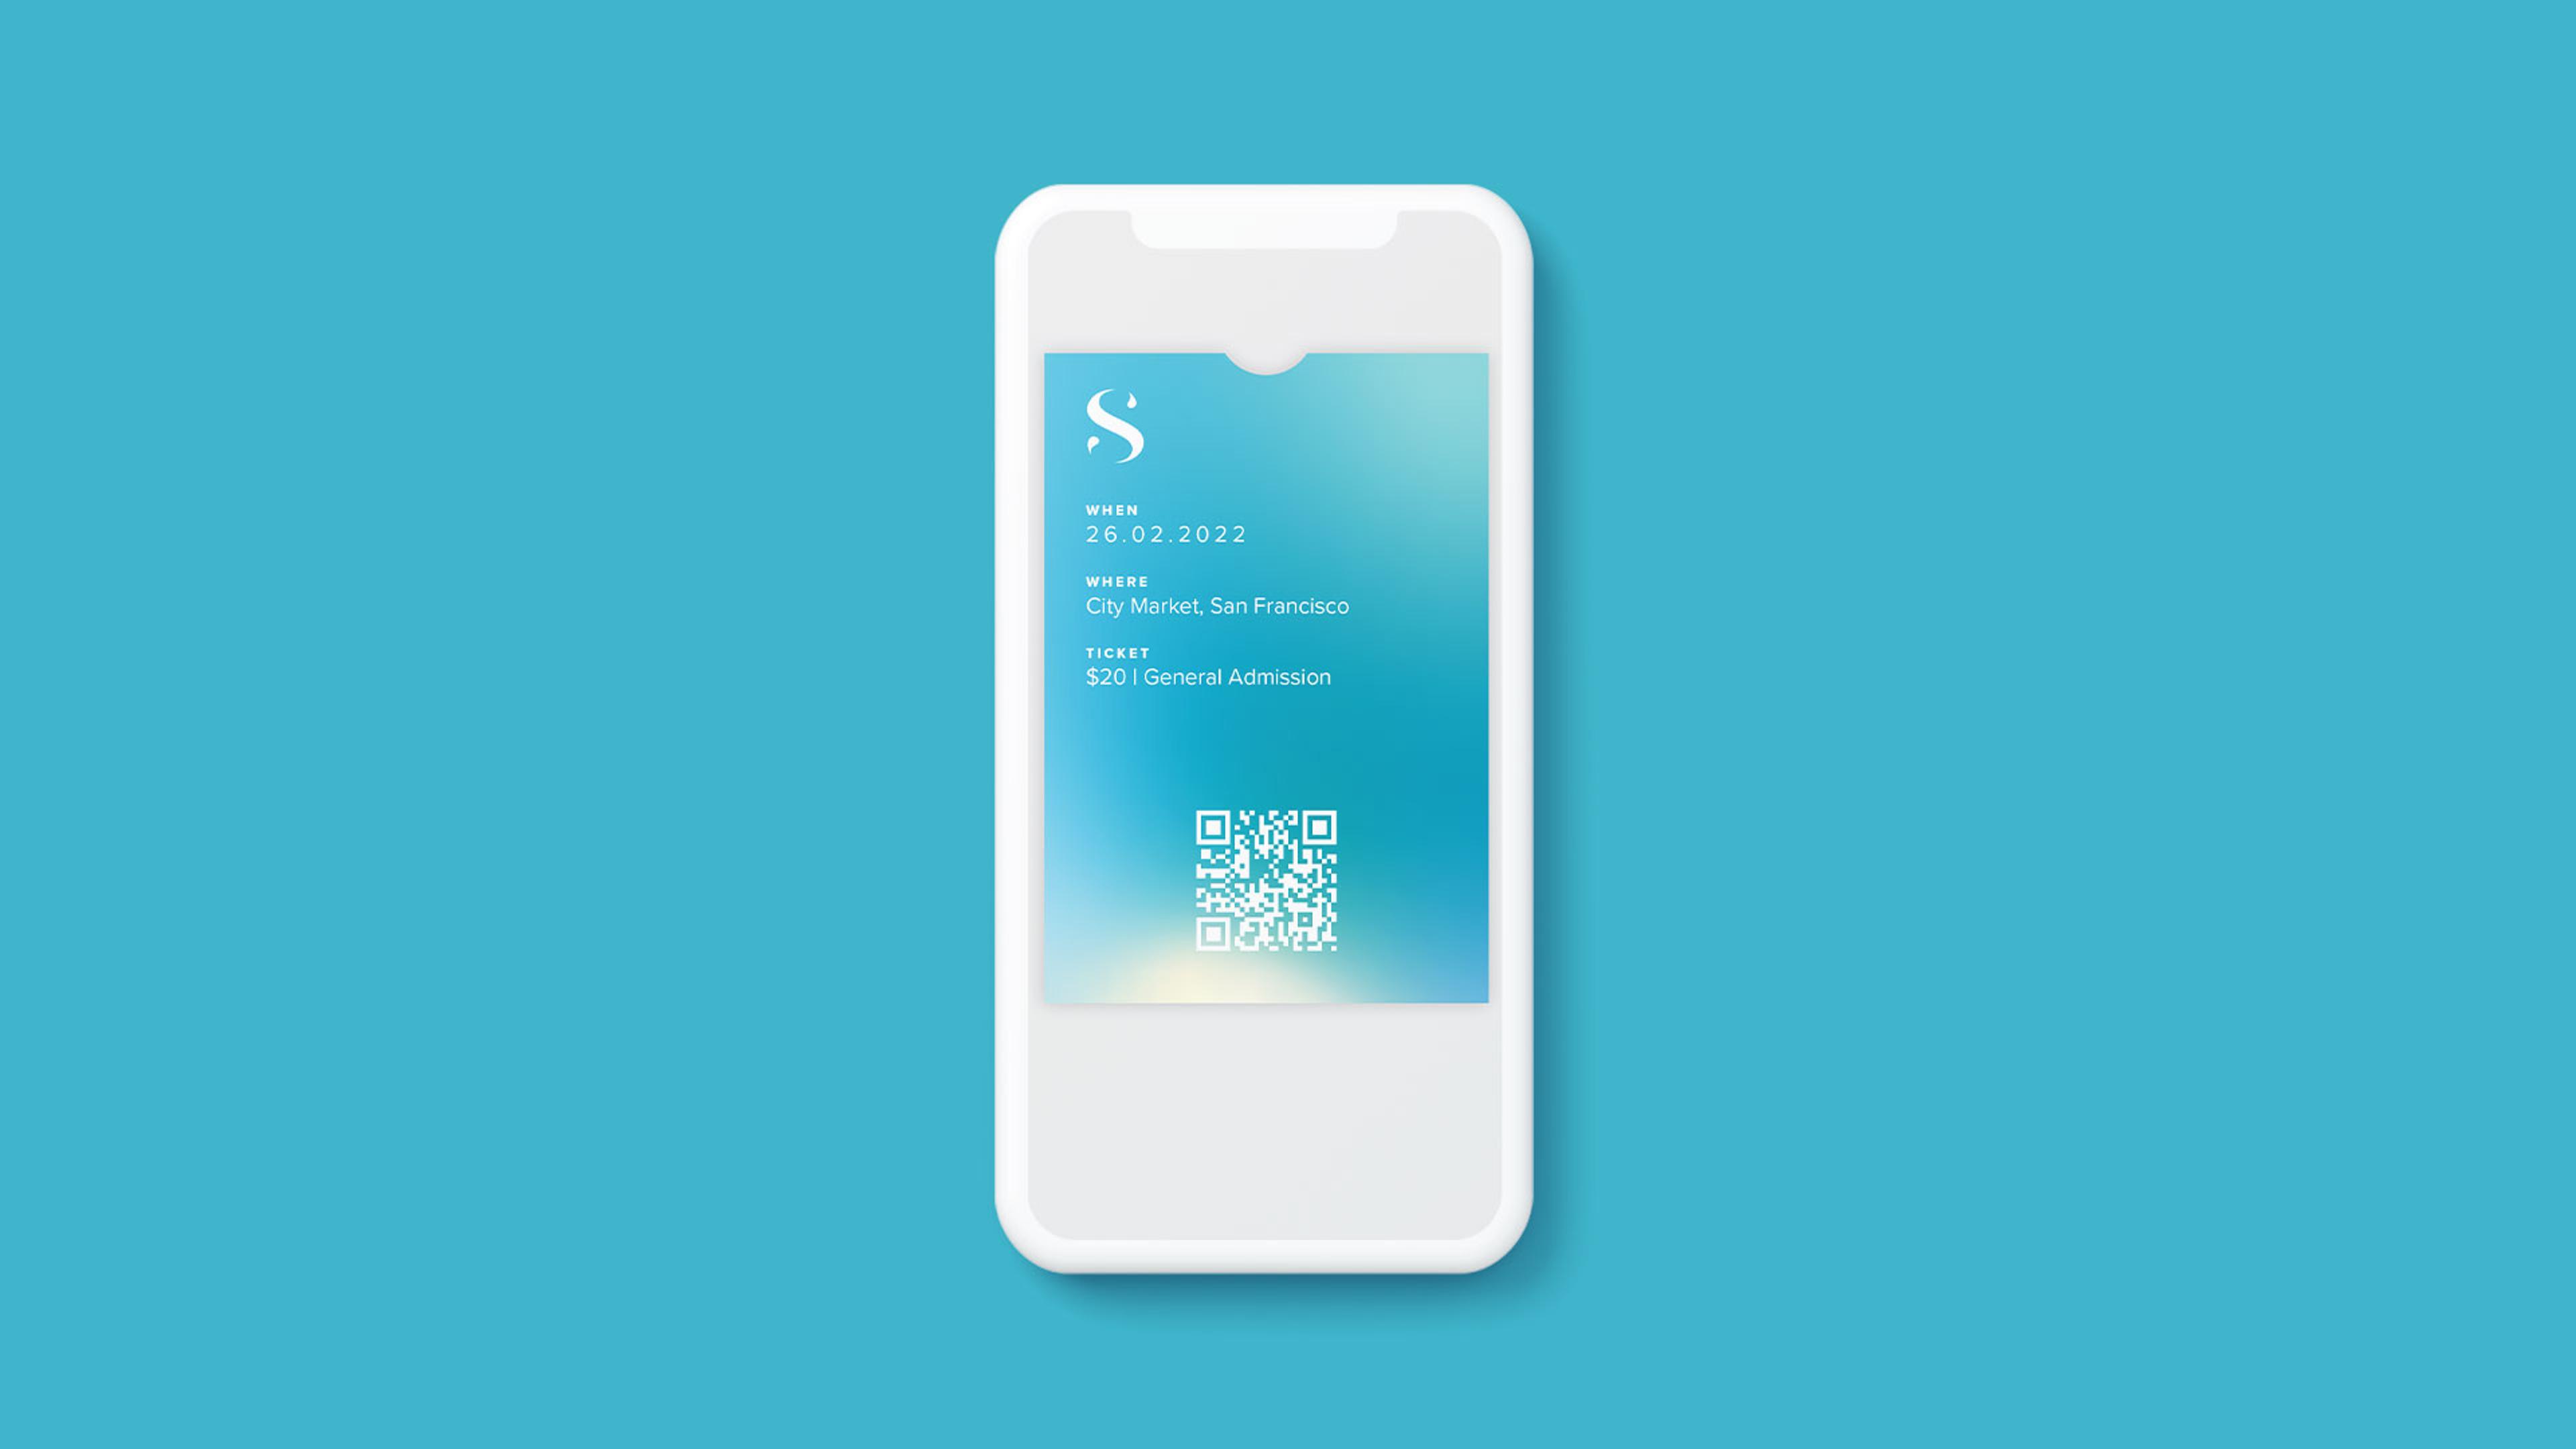 ShoreLine digital ticket with a QR code and ticket details